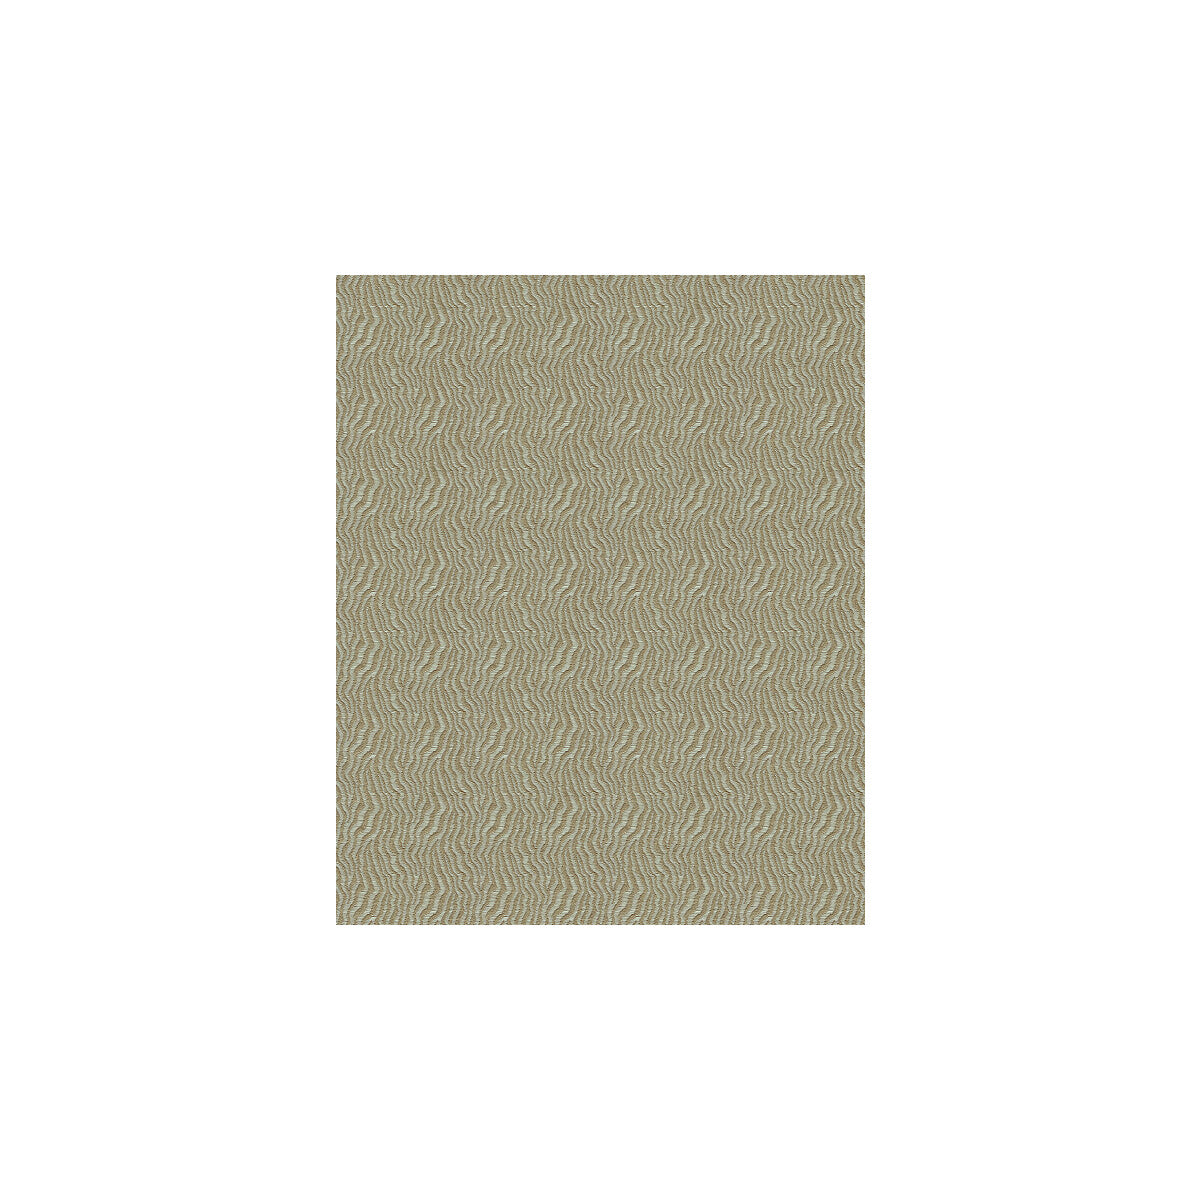 Free Water fabric in haze color - pattern 32505.106.0 - by Kravet Contract in the Candice Olson collection